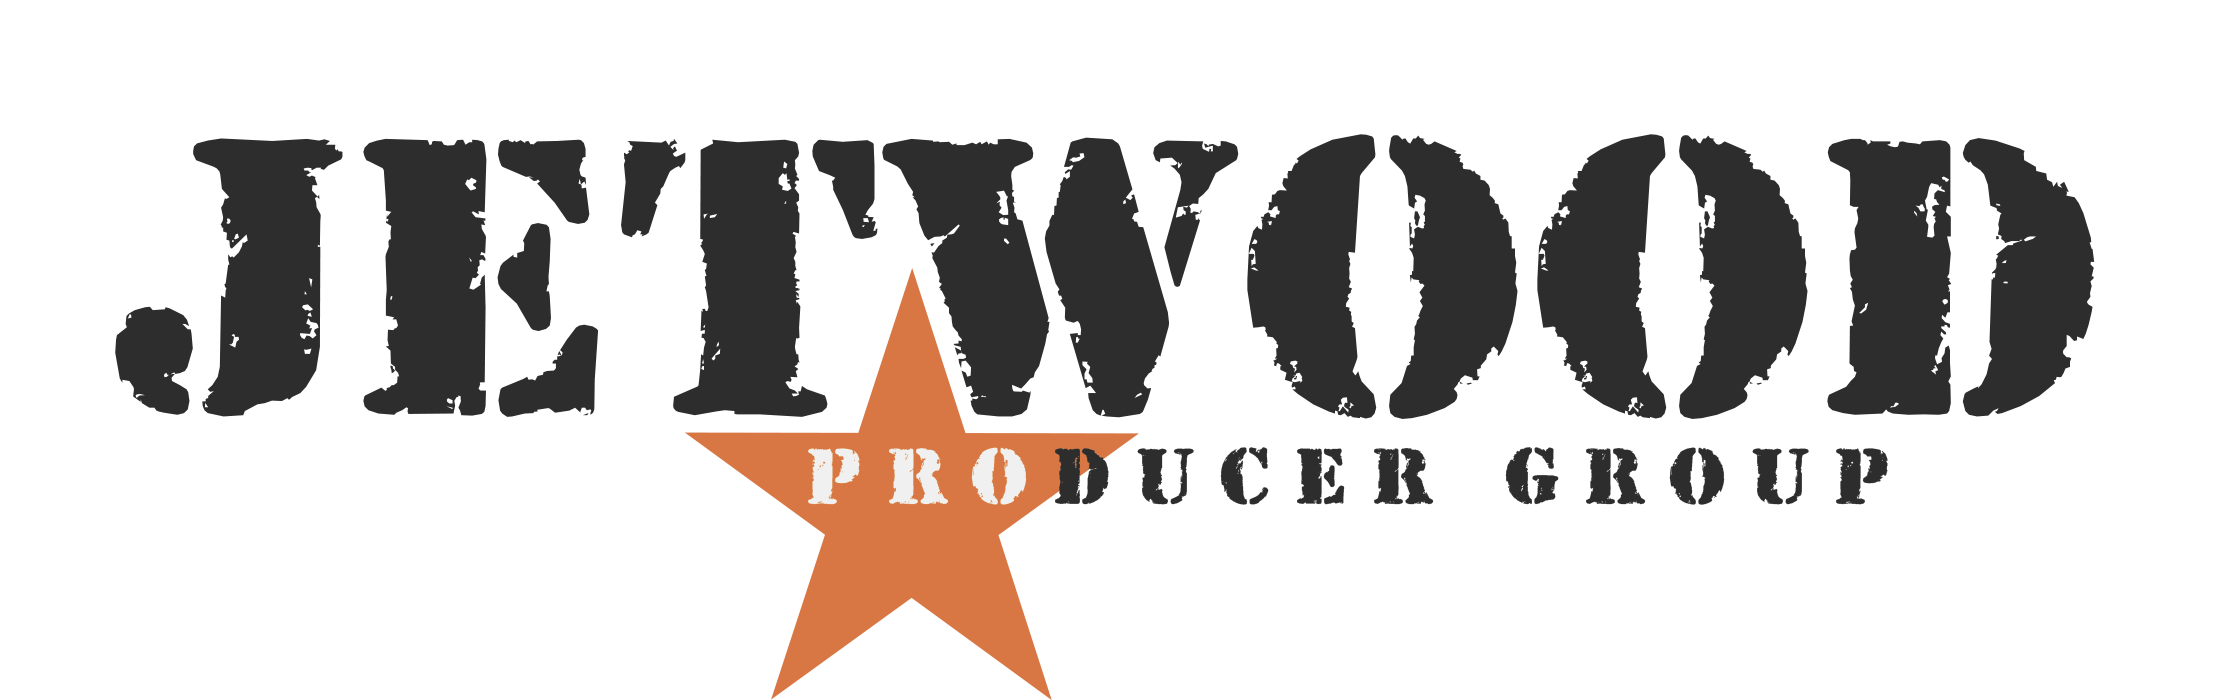 Jetwood Producer Group